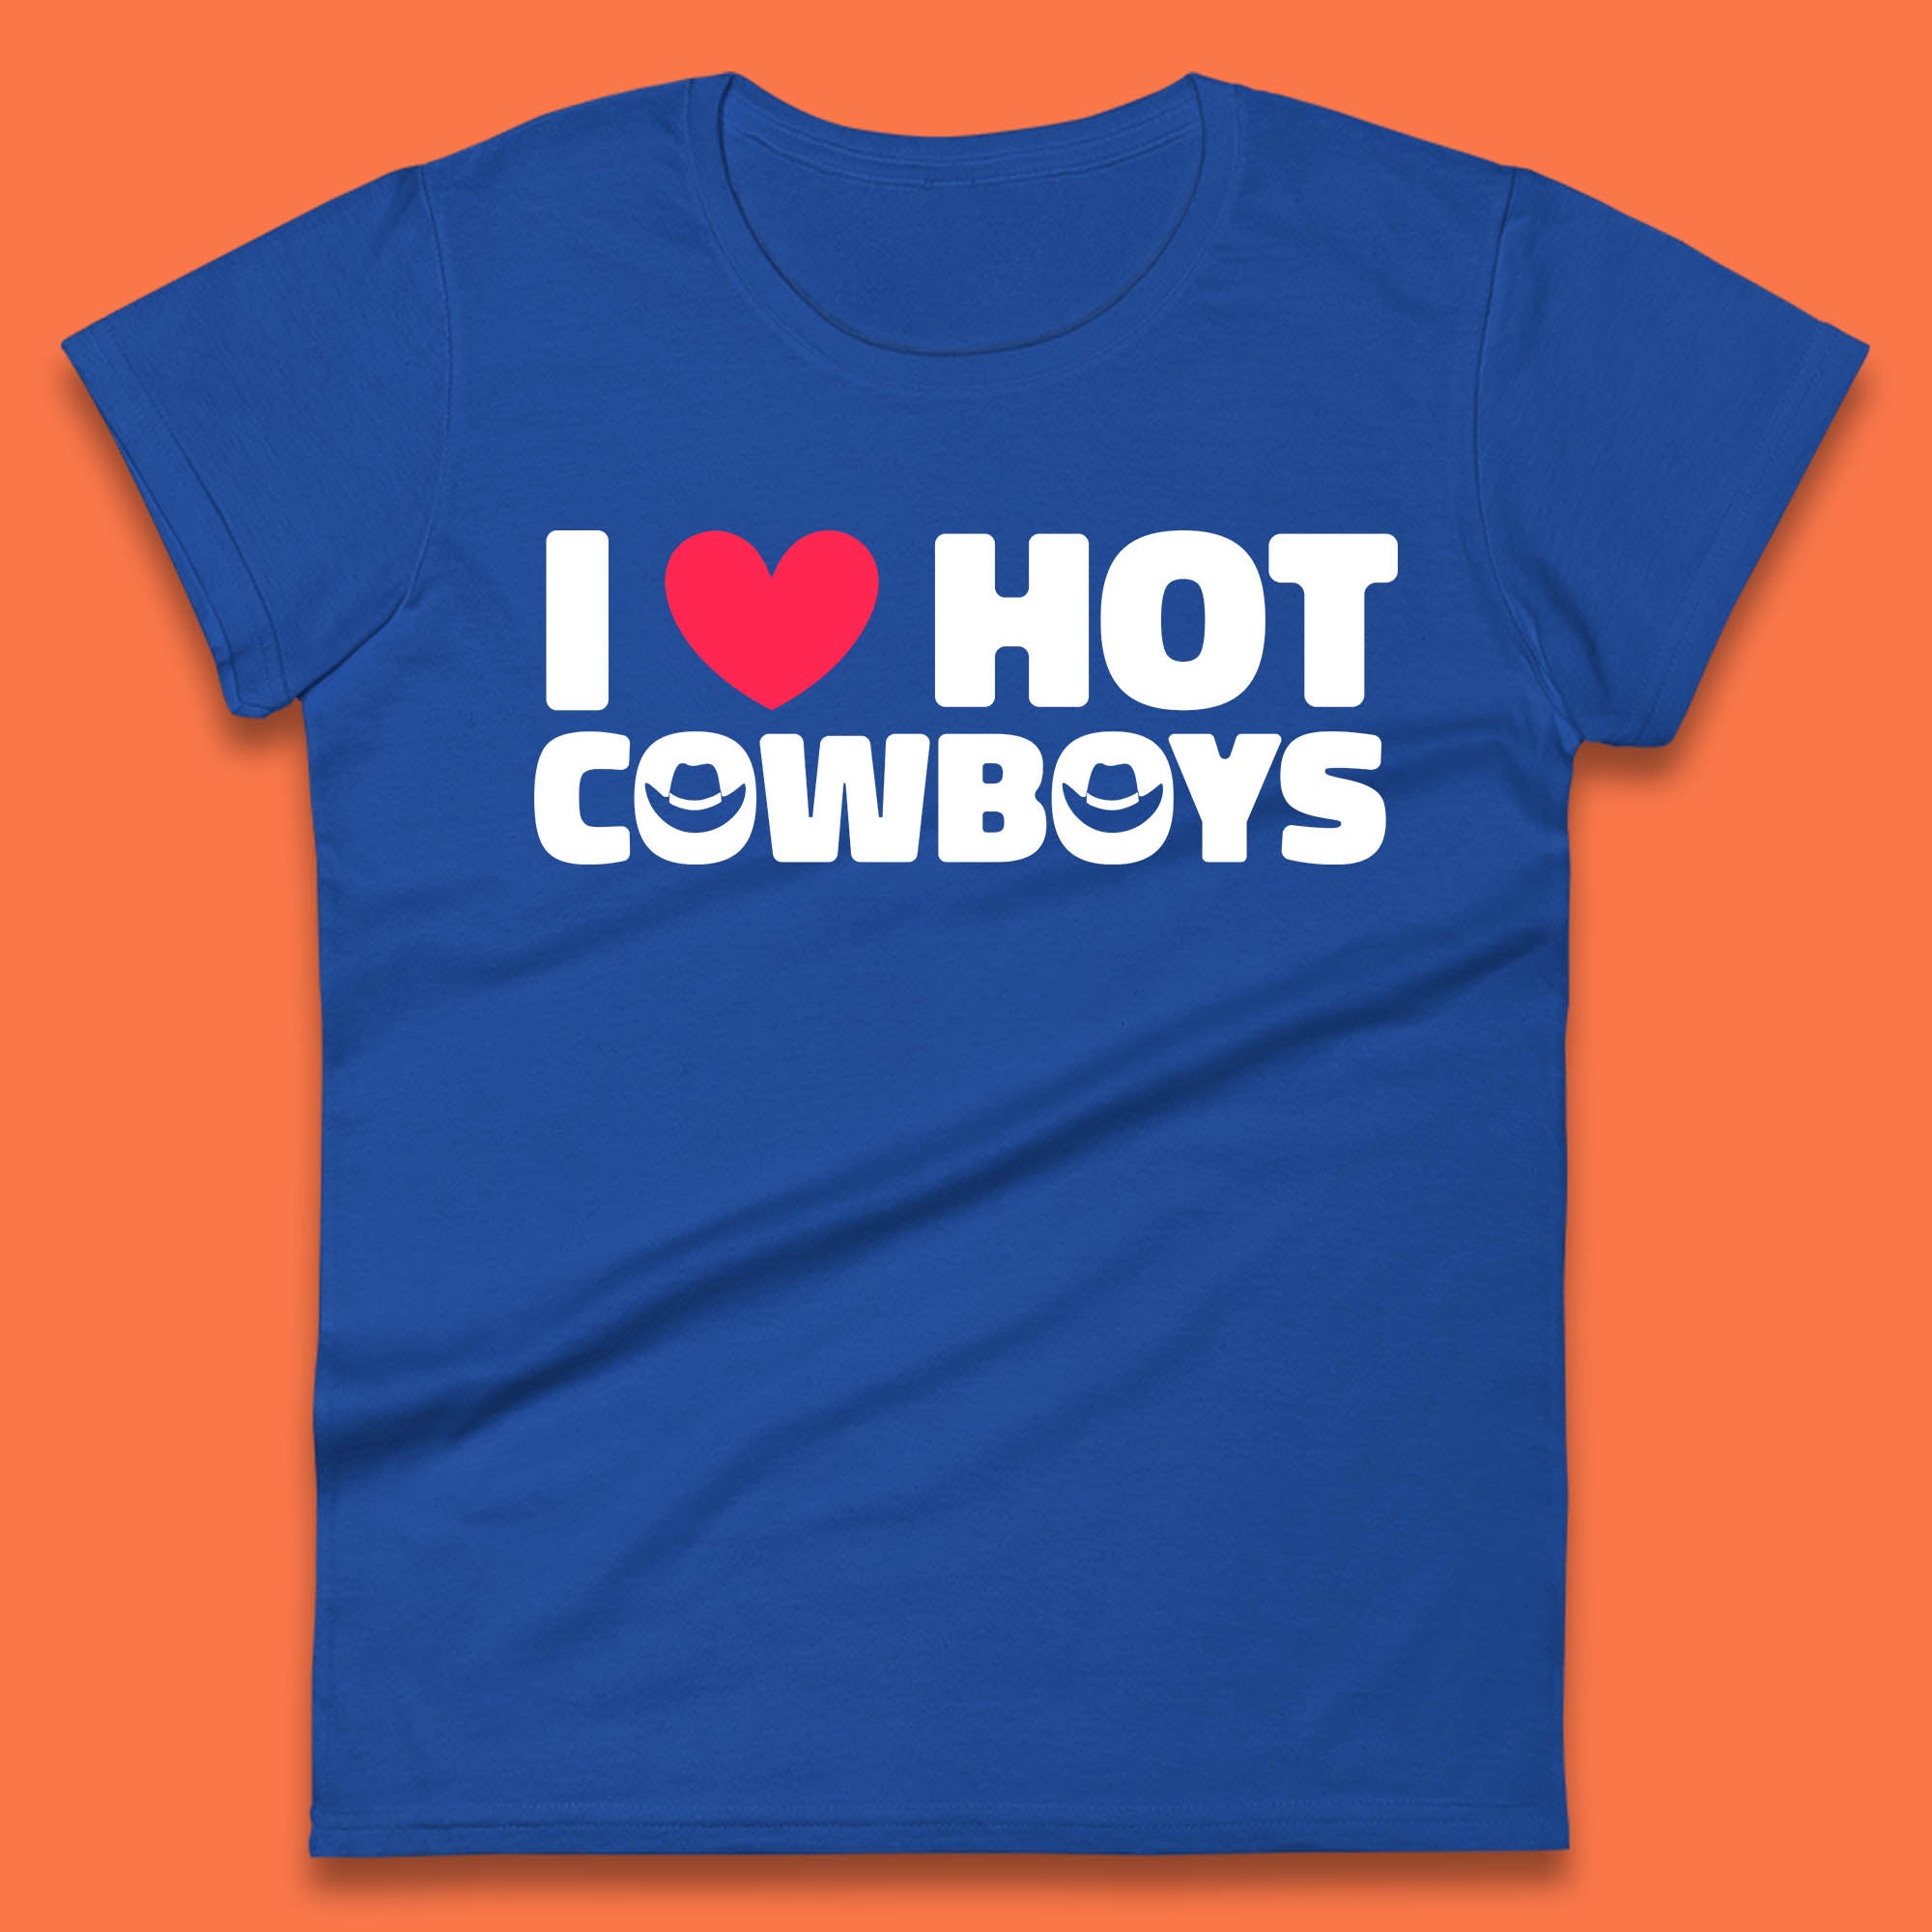 I Love Hot Cowboys Funny Country Western Rodeo Farm Funny Slogan Womens Tee Top